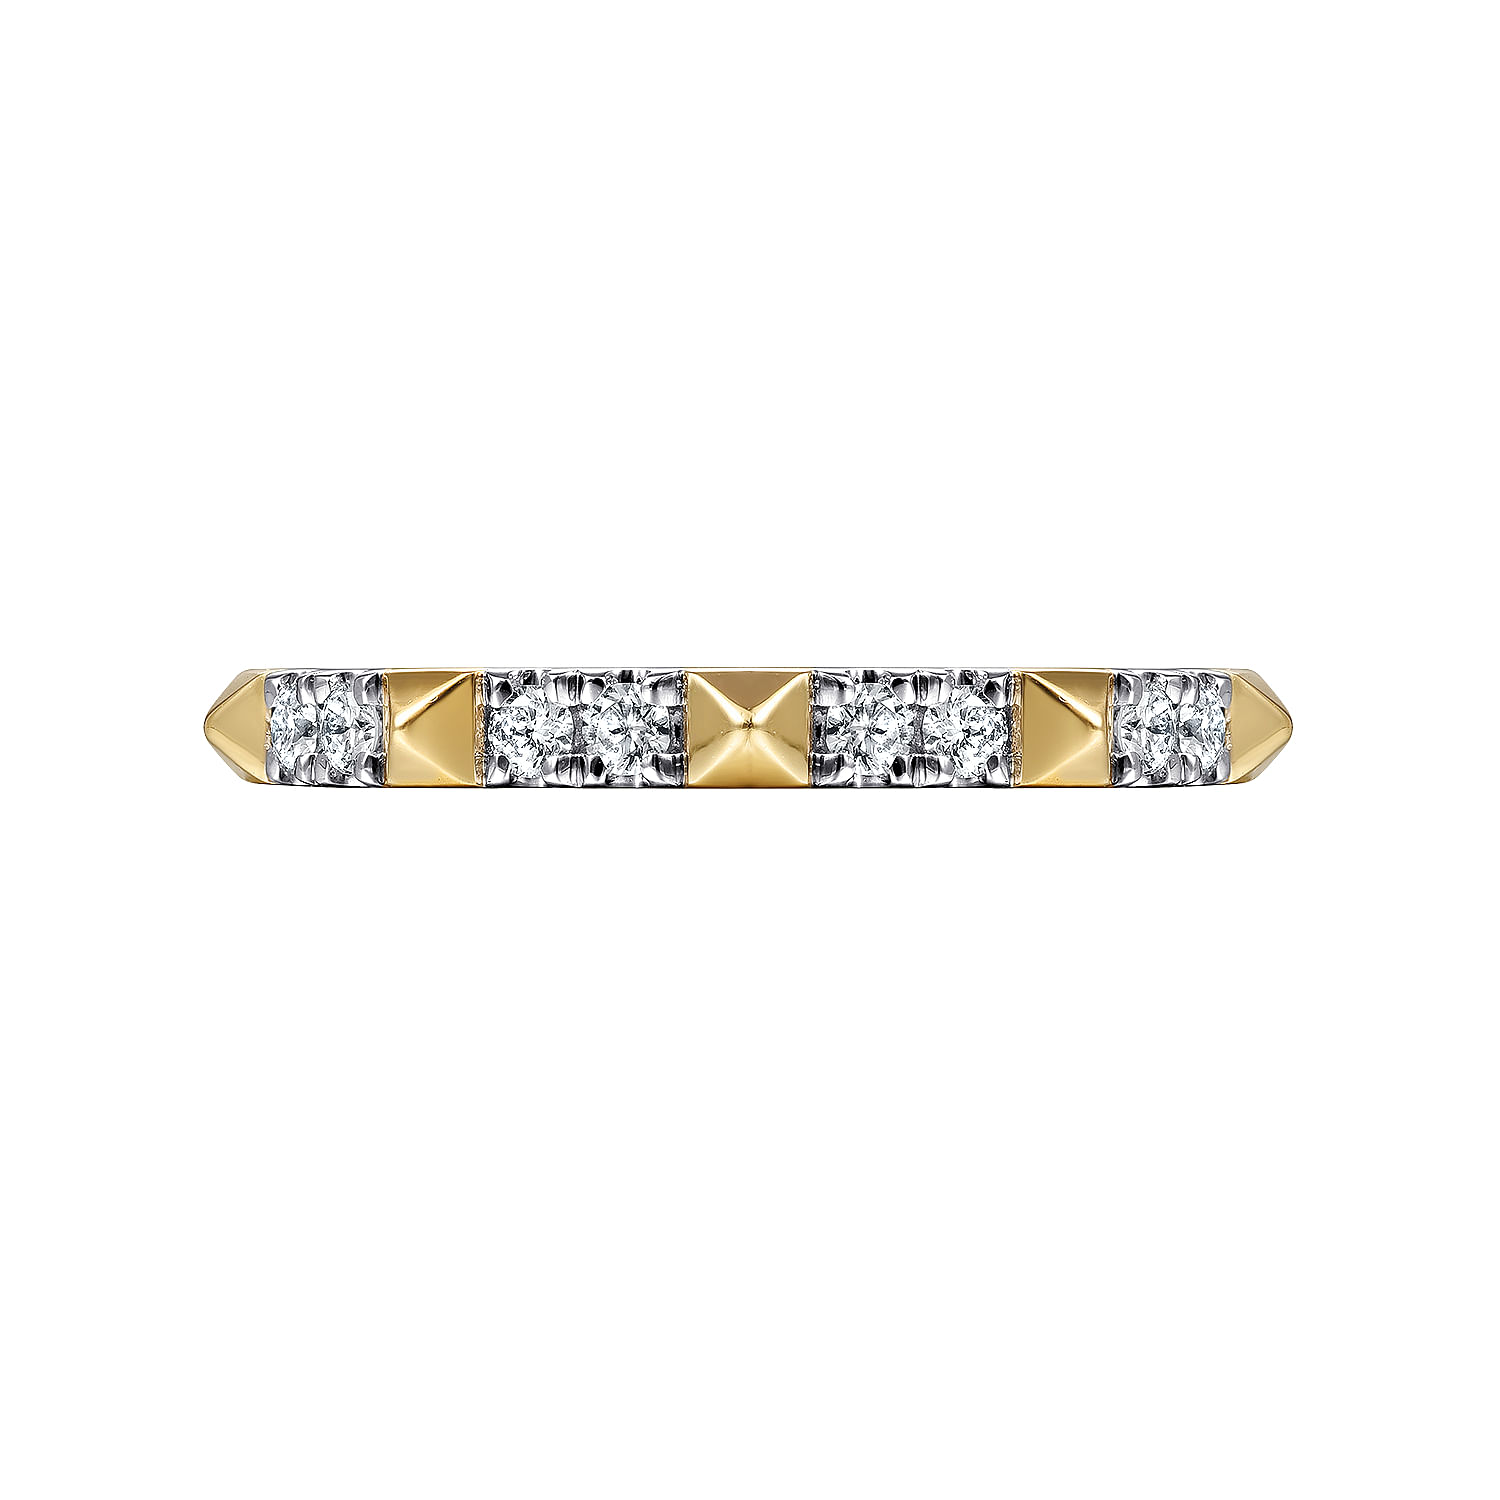 14K Yellow Gold Alternating Diamond and Pyramid Stackable Ring